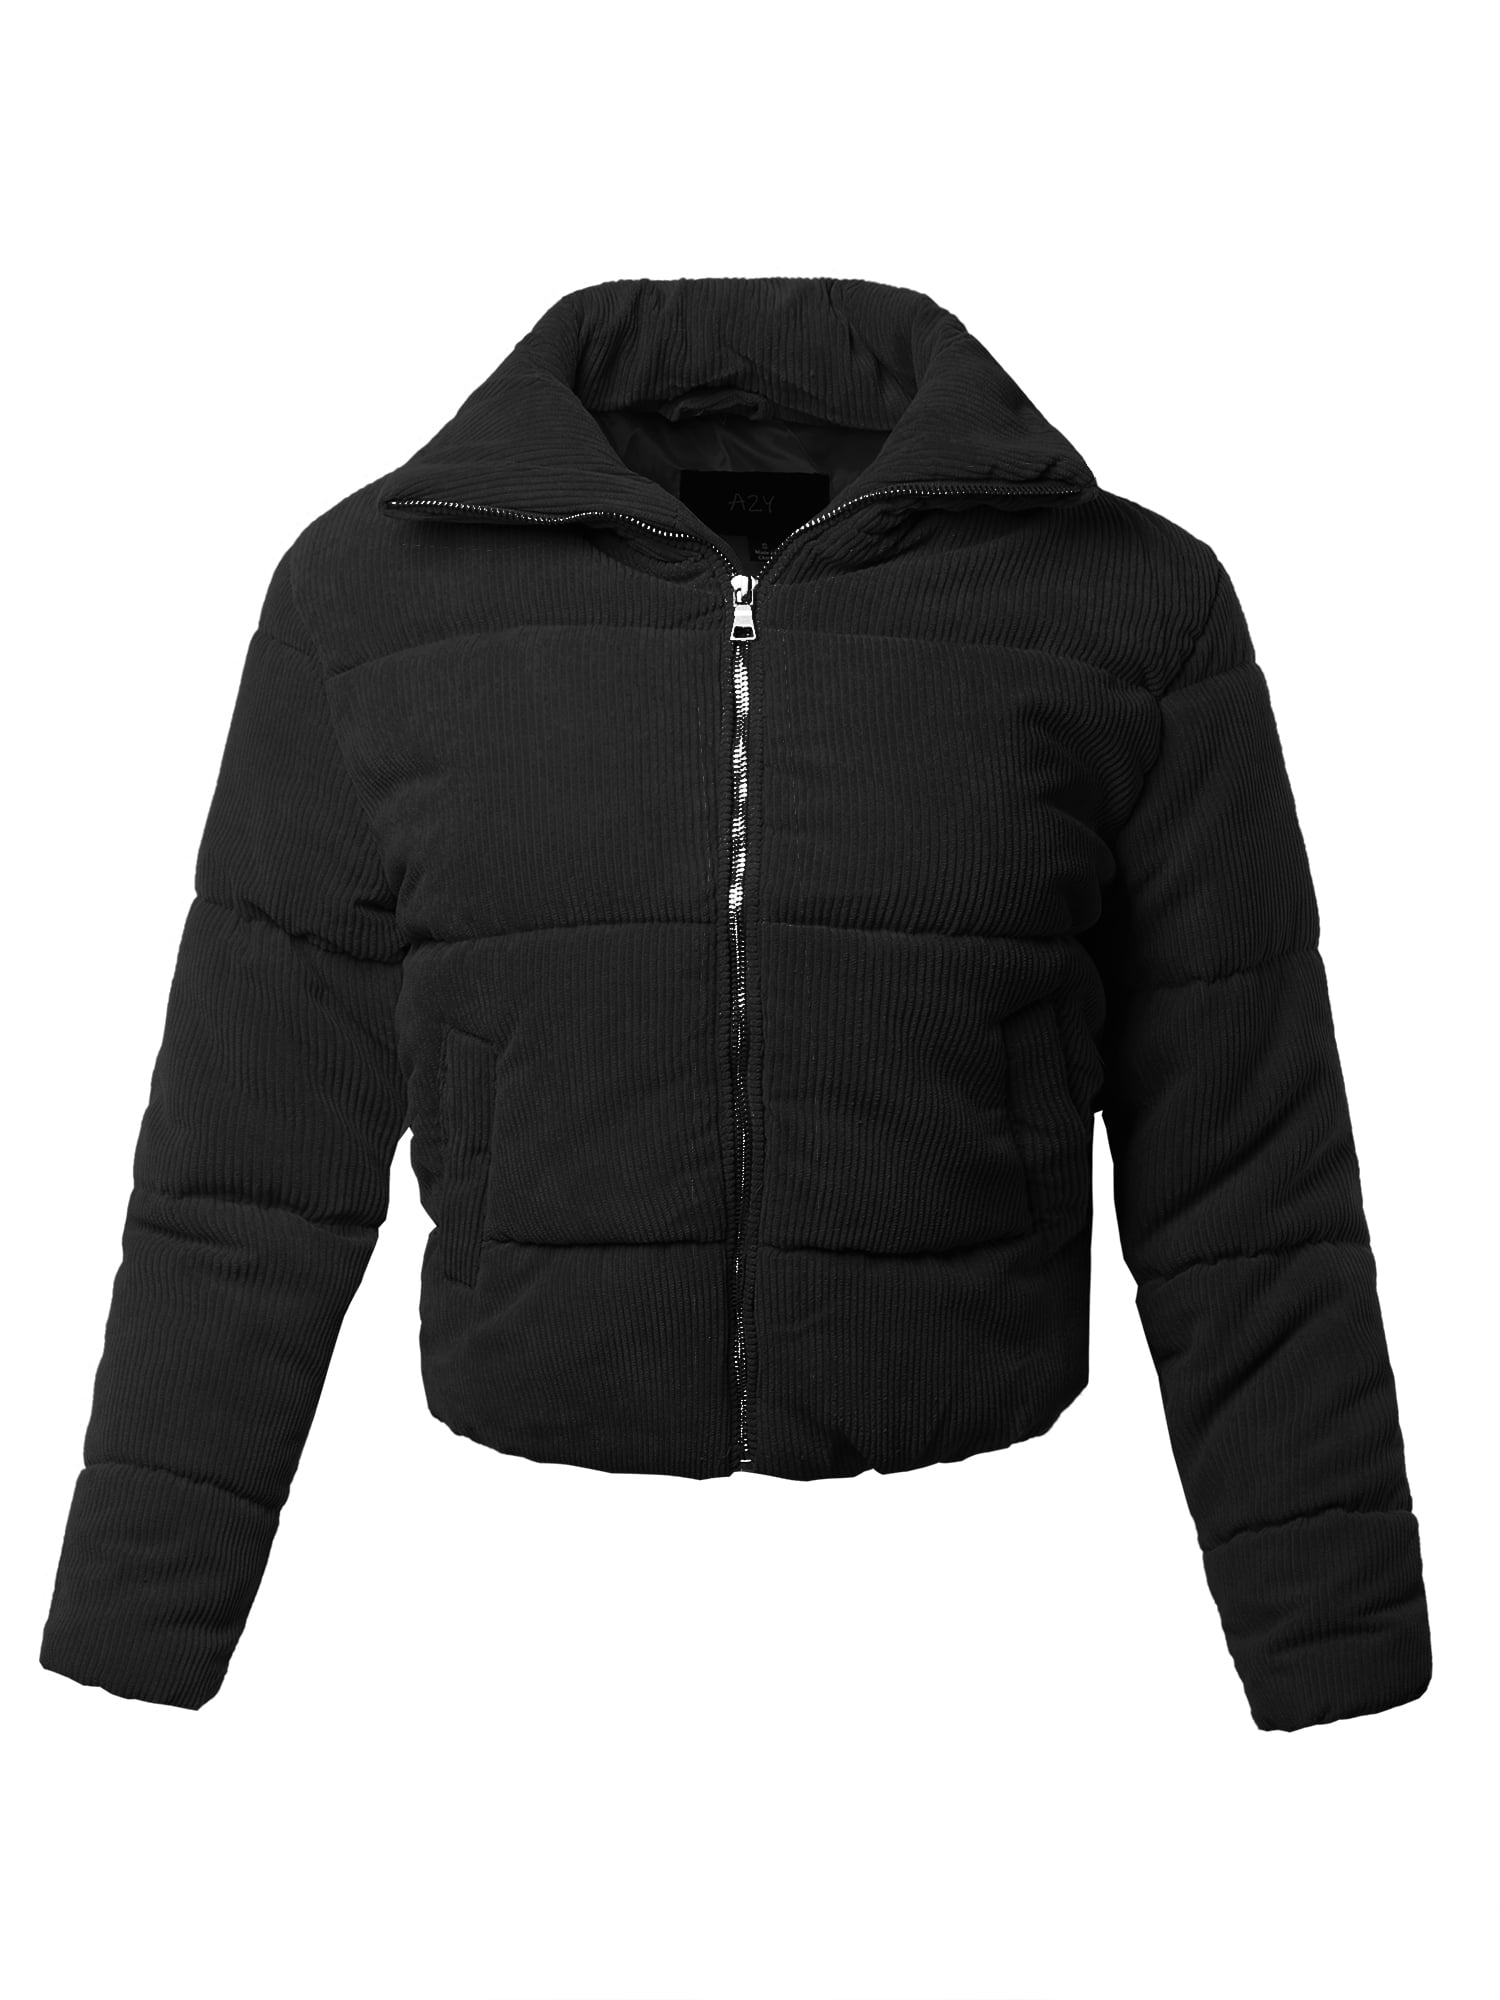 A2Y - A2Y Women's Corduroy High Neck Quilted Puffer Jacket Black 2XL ...